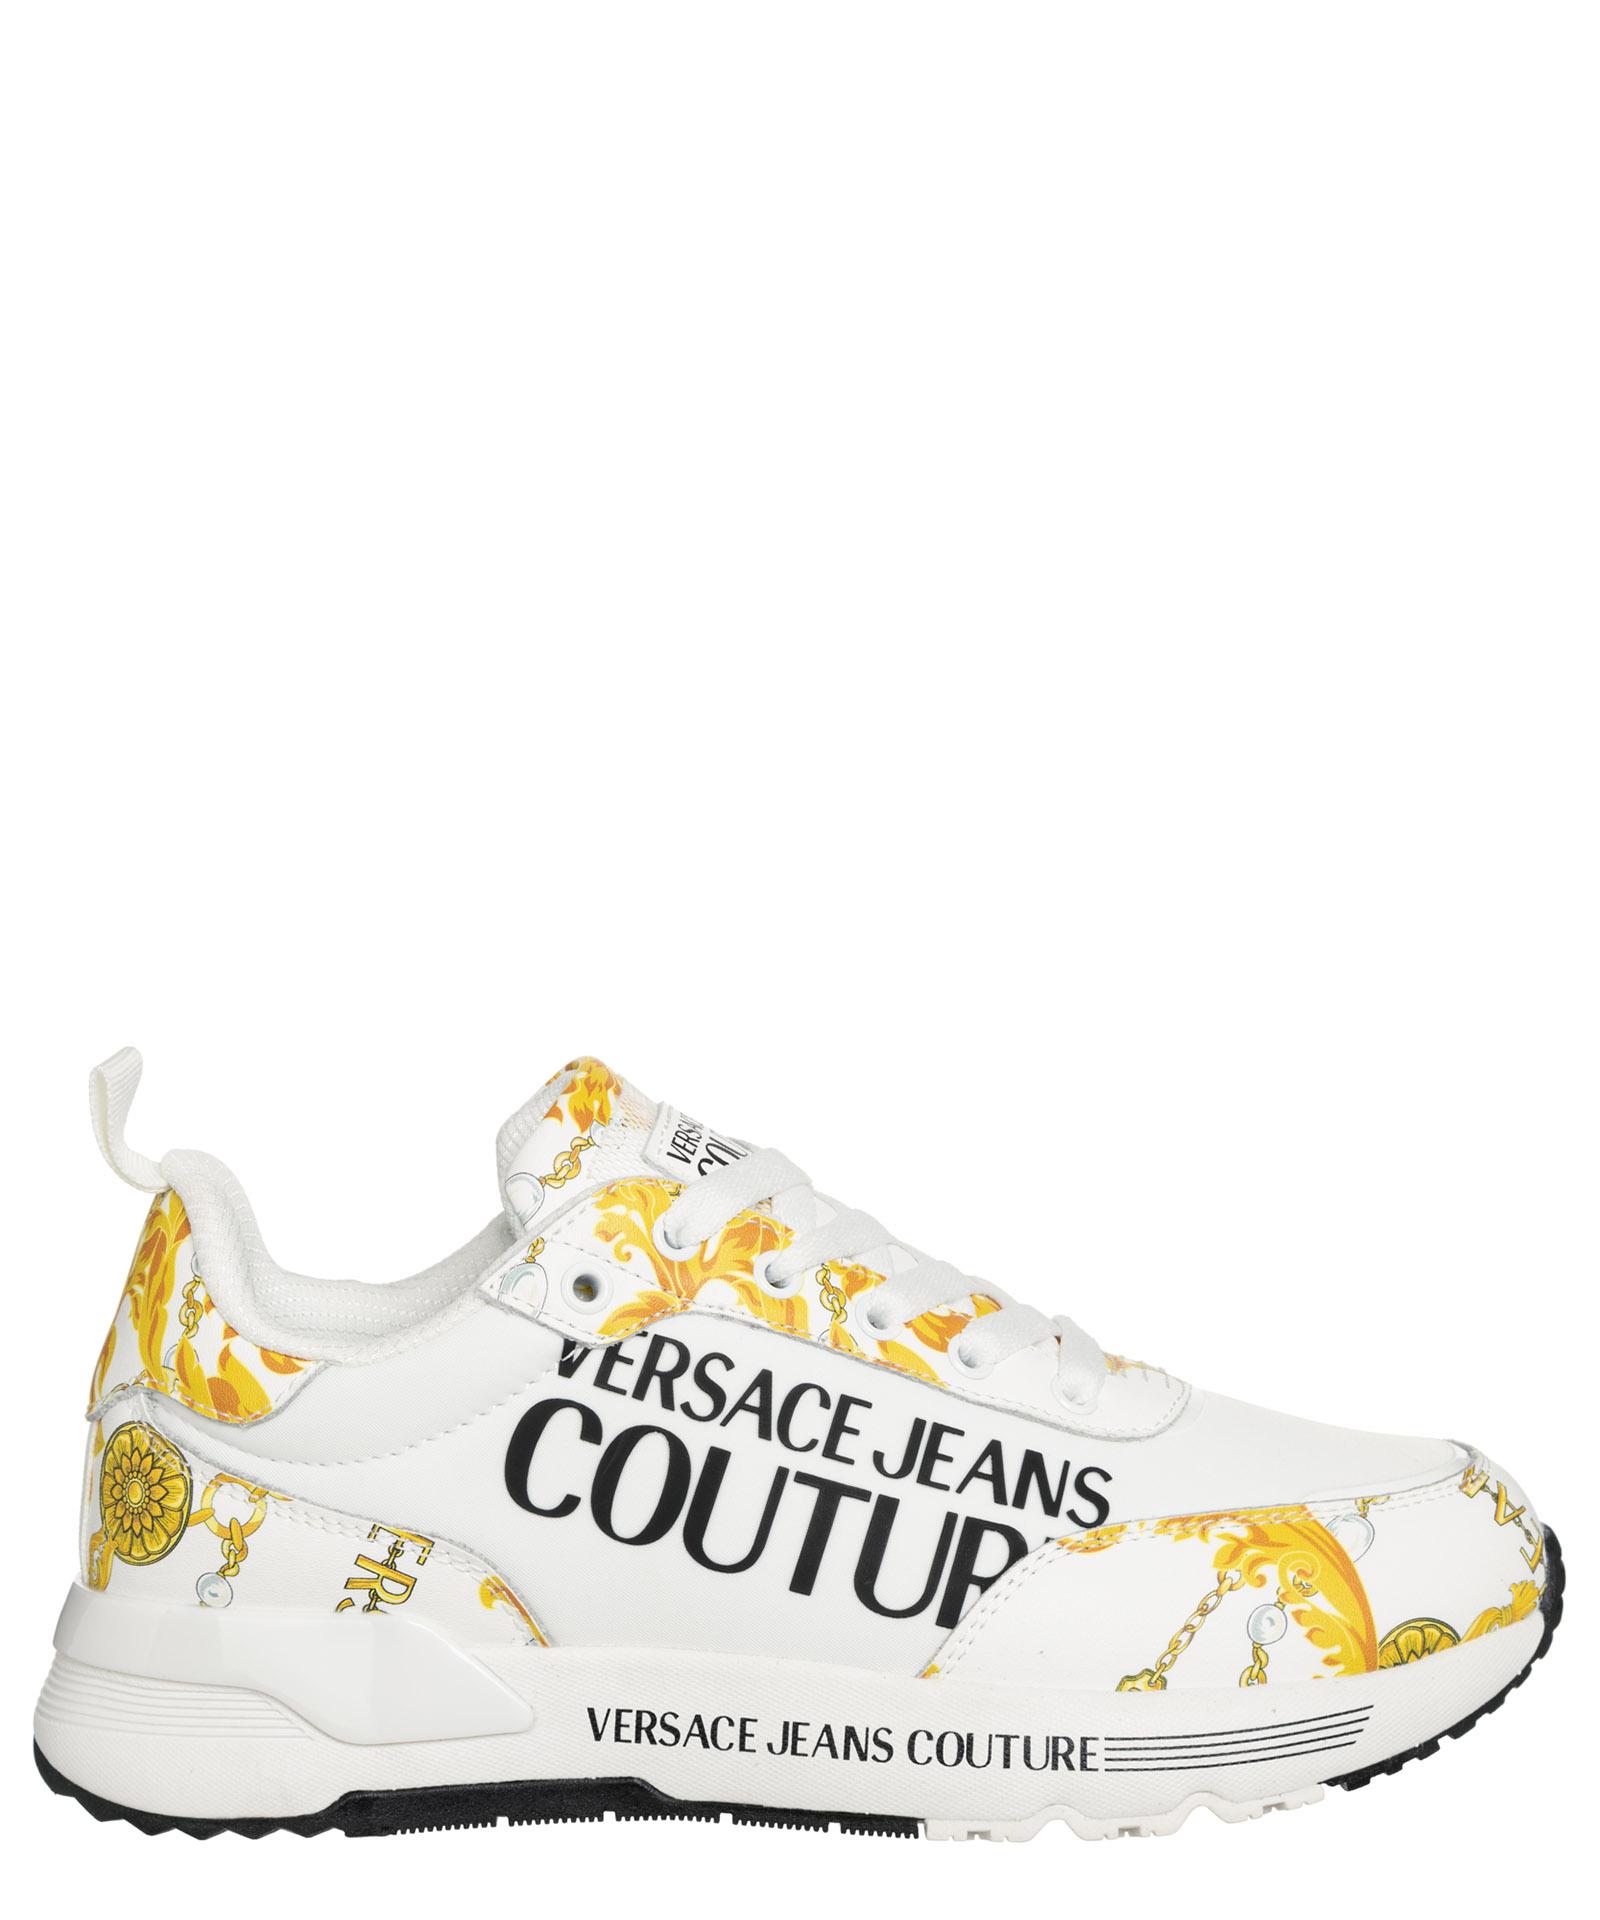 Versace Jeans Couture Dynamic Chain Couture Leather Sneakers in White | Lyst